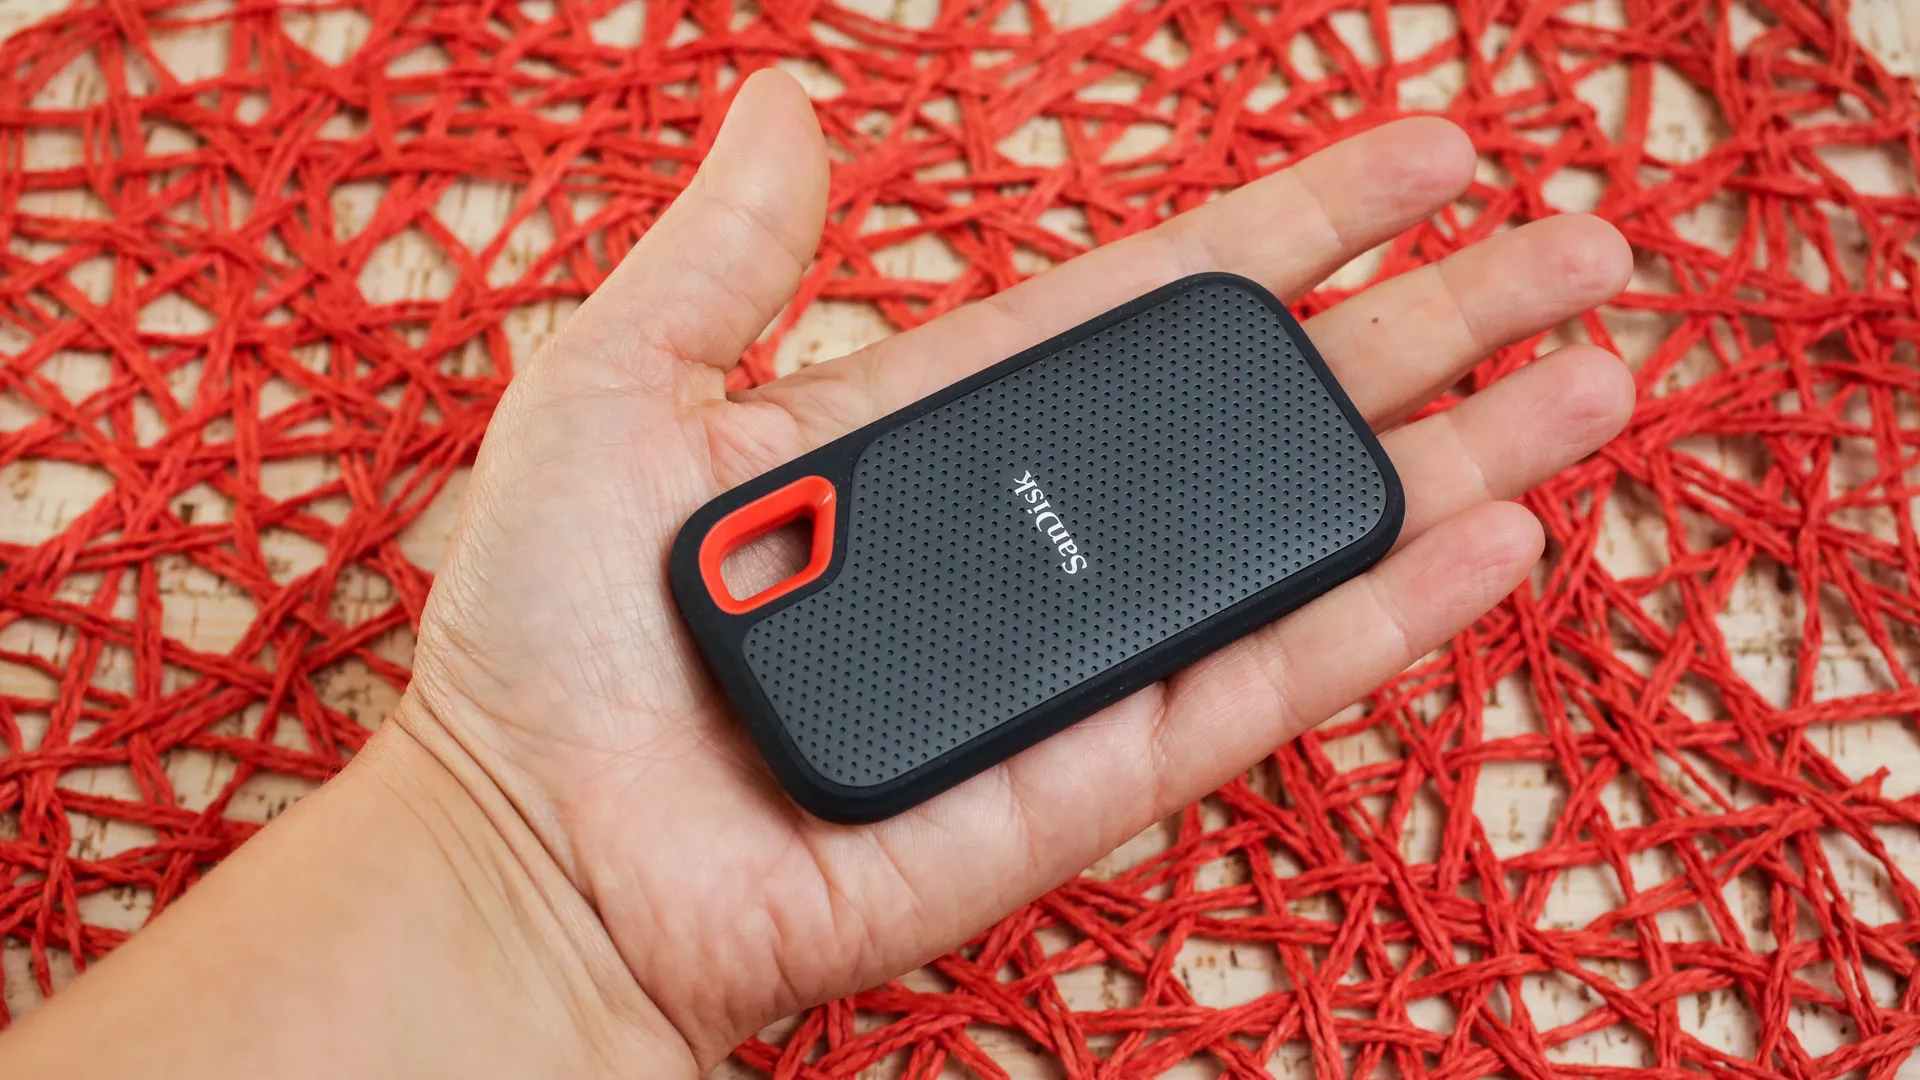 How To Use Sandisk Portable SSD